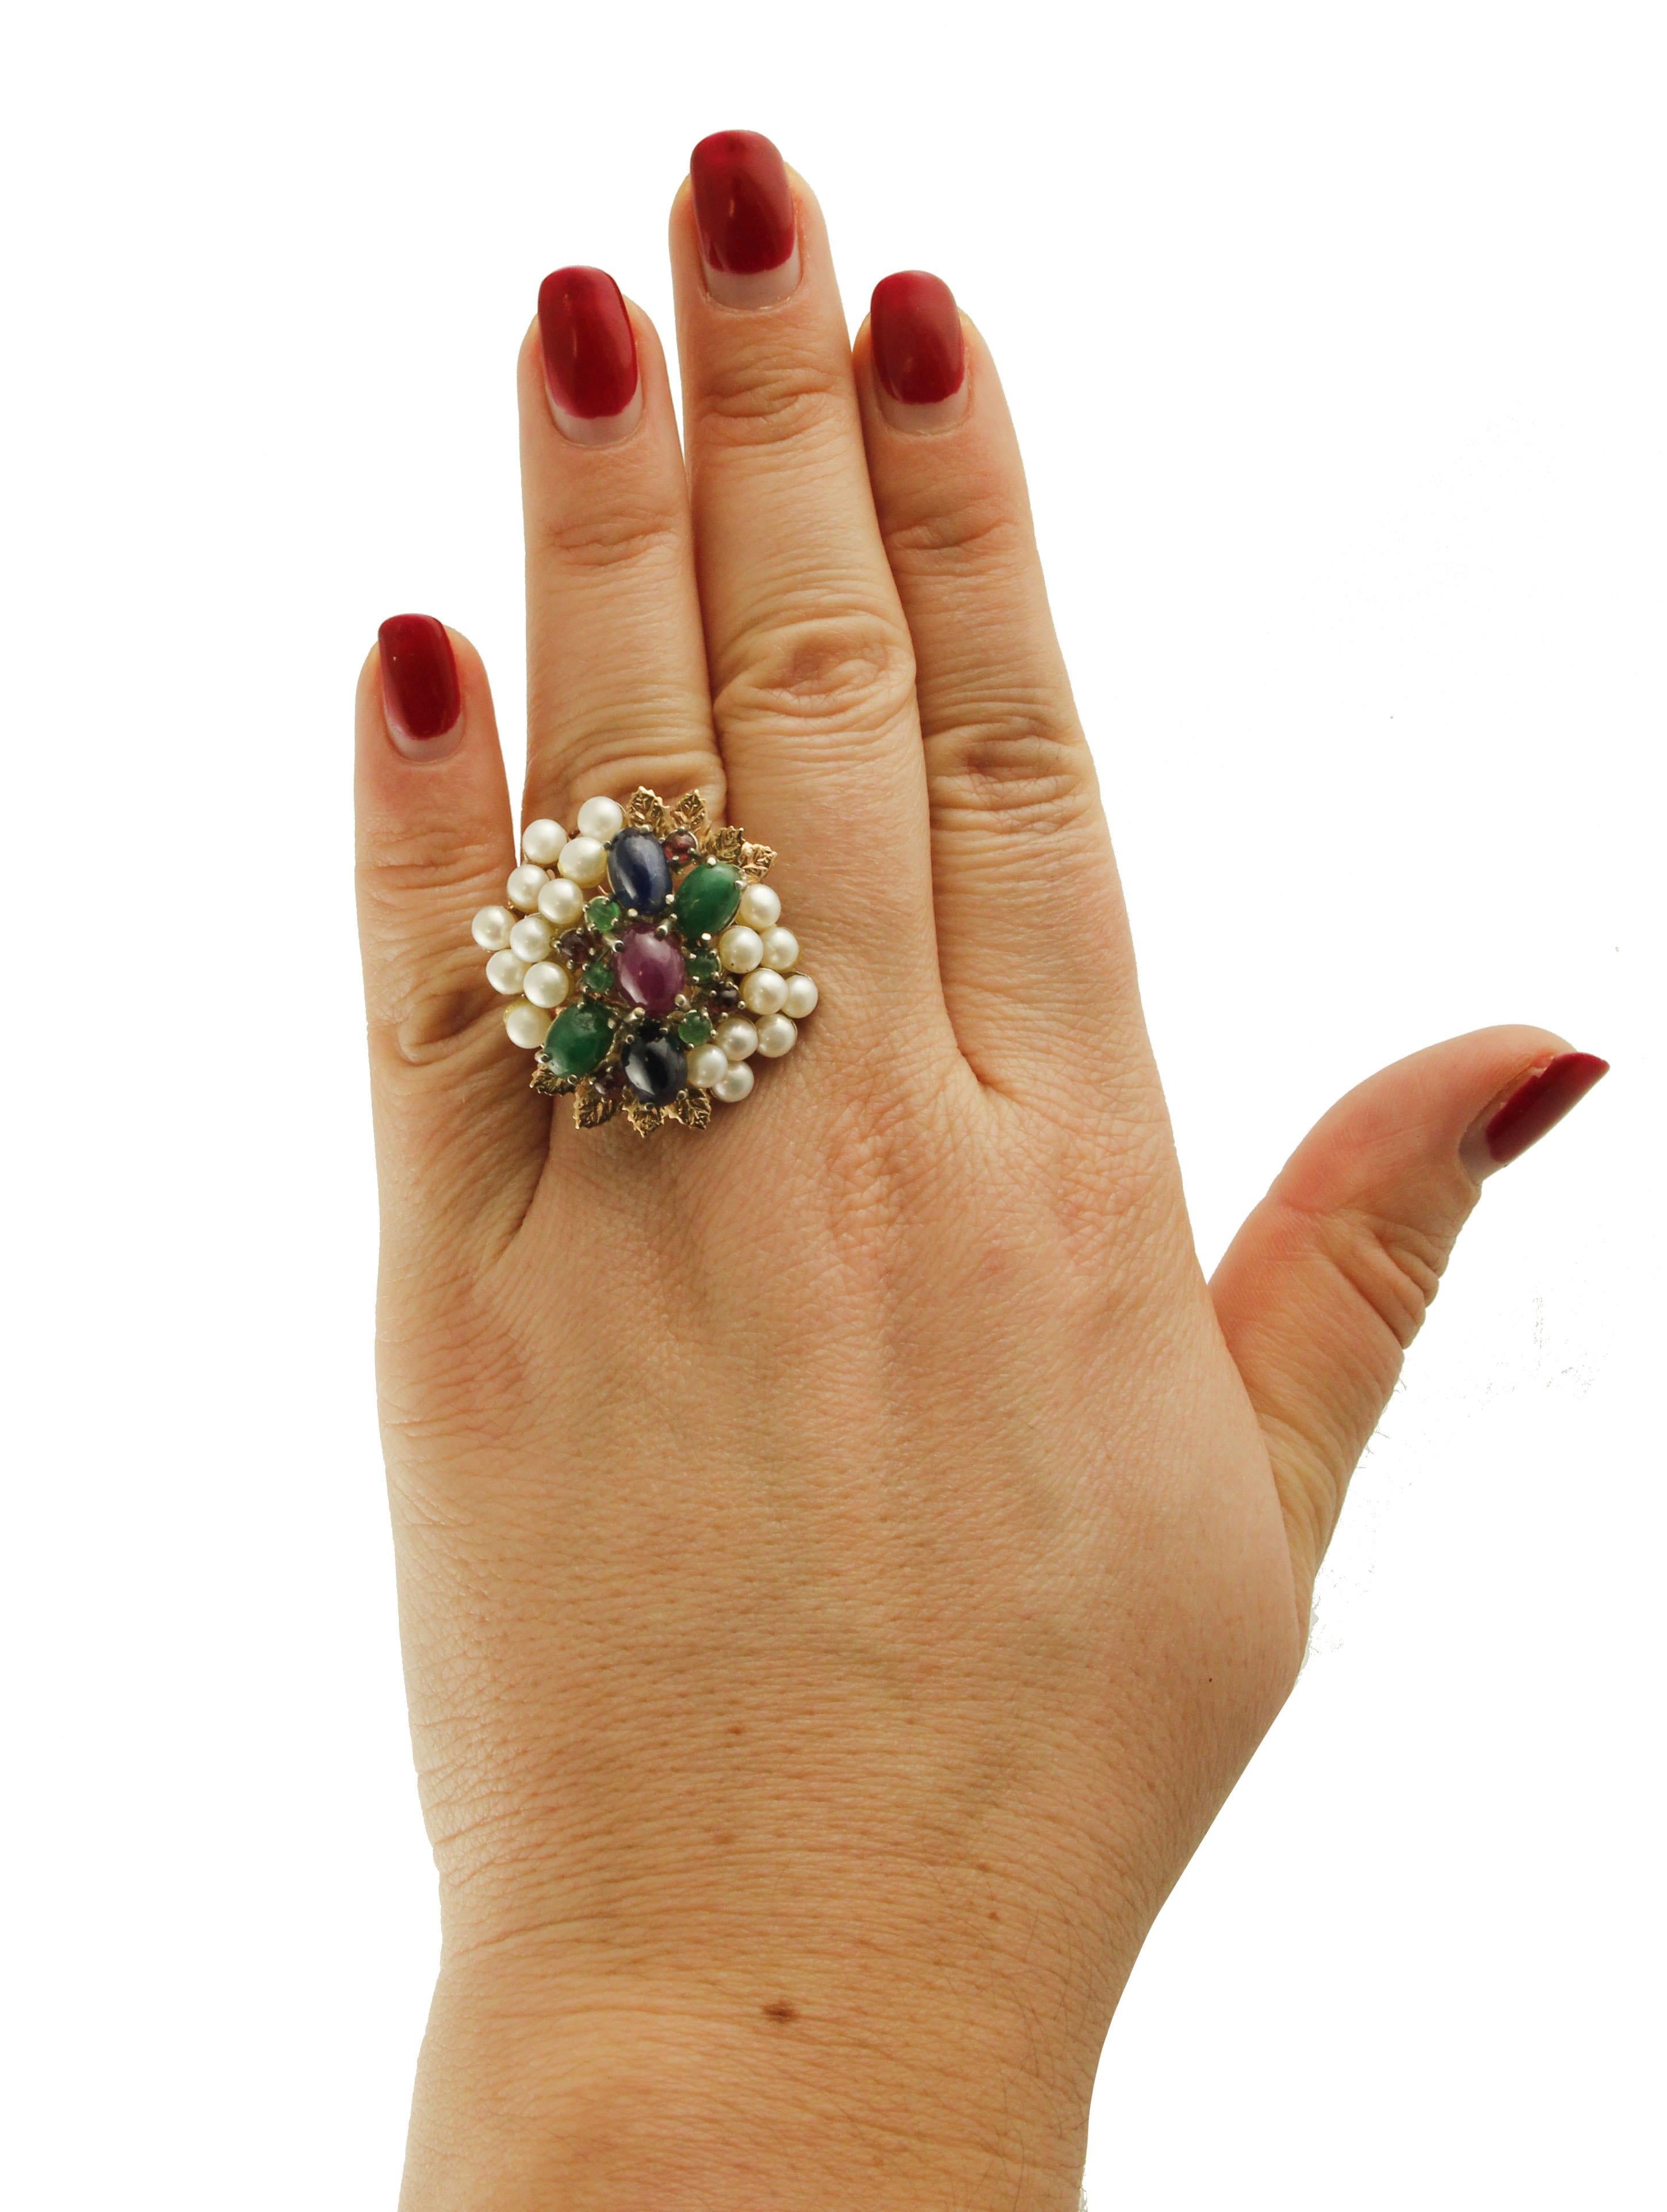 Women's Sapphires Rubies Emeralds Pearls Rose Gold and Silver Cocktail Ring